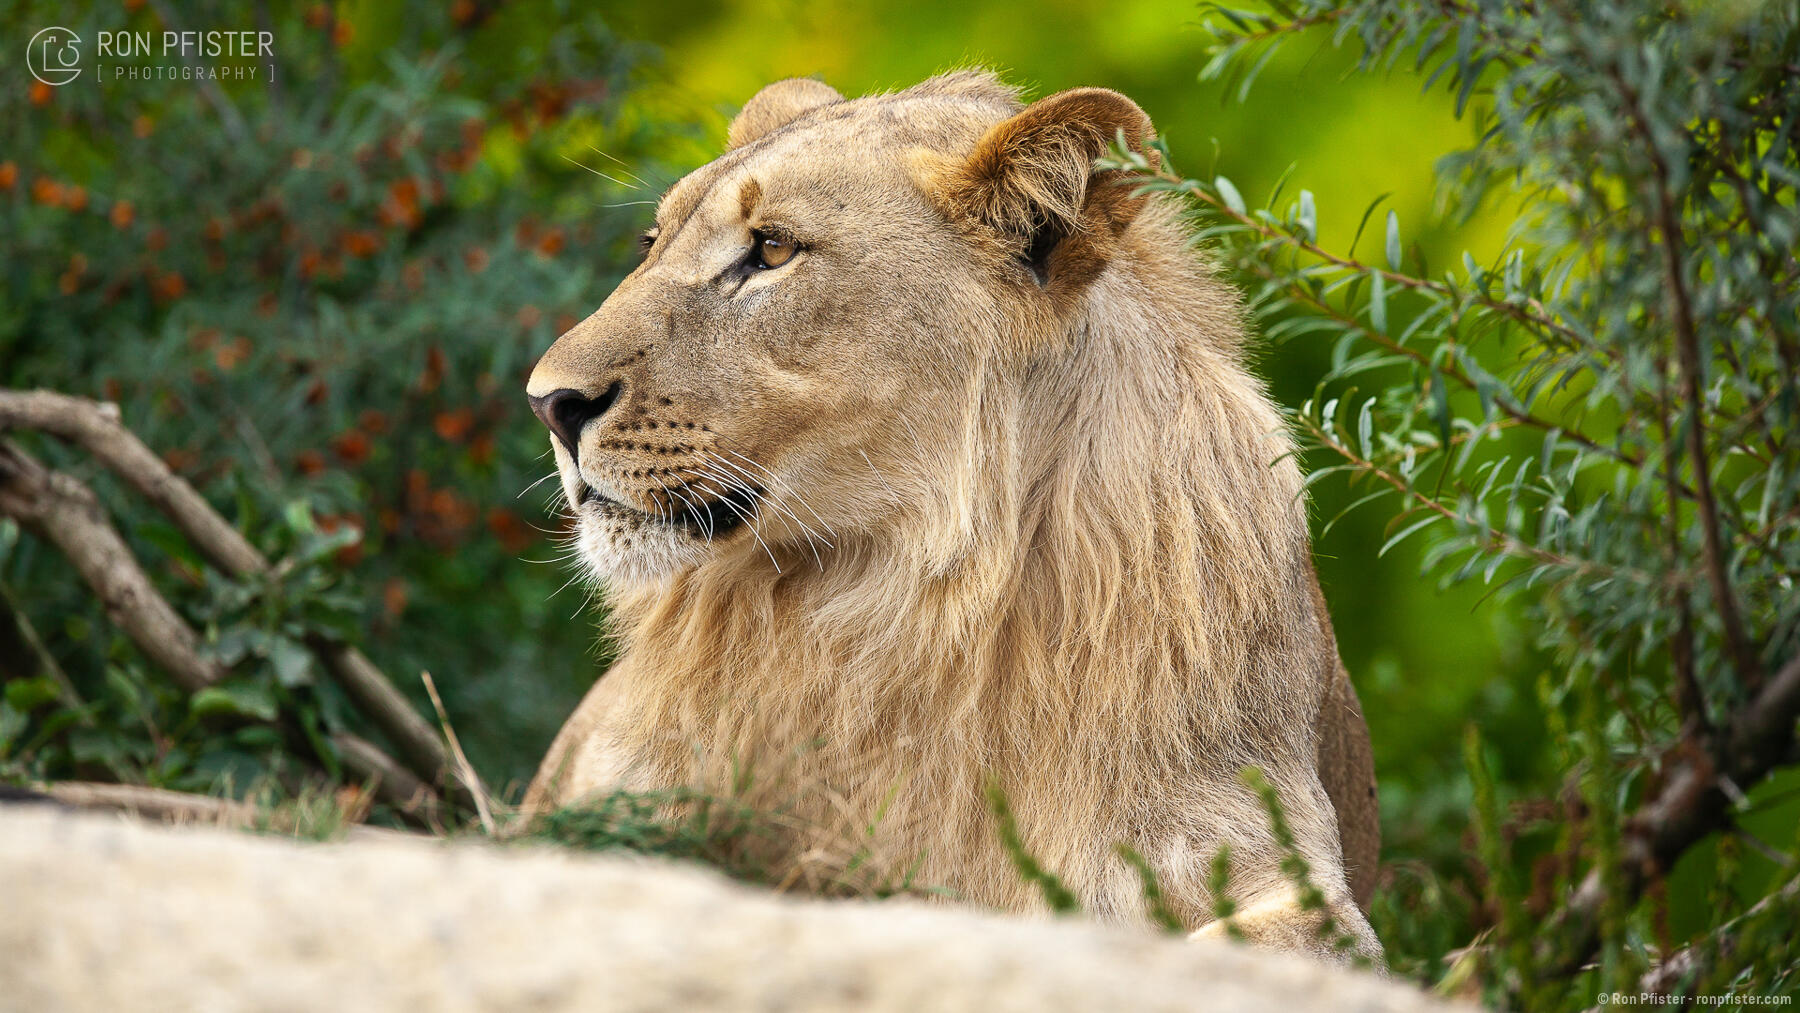 Young Male Lion